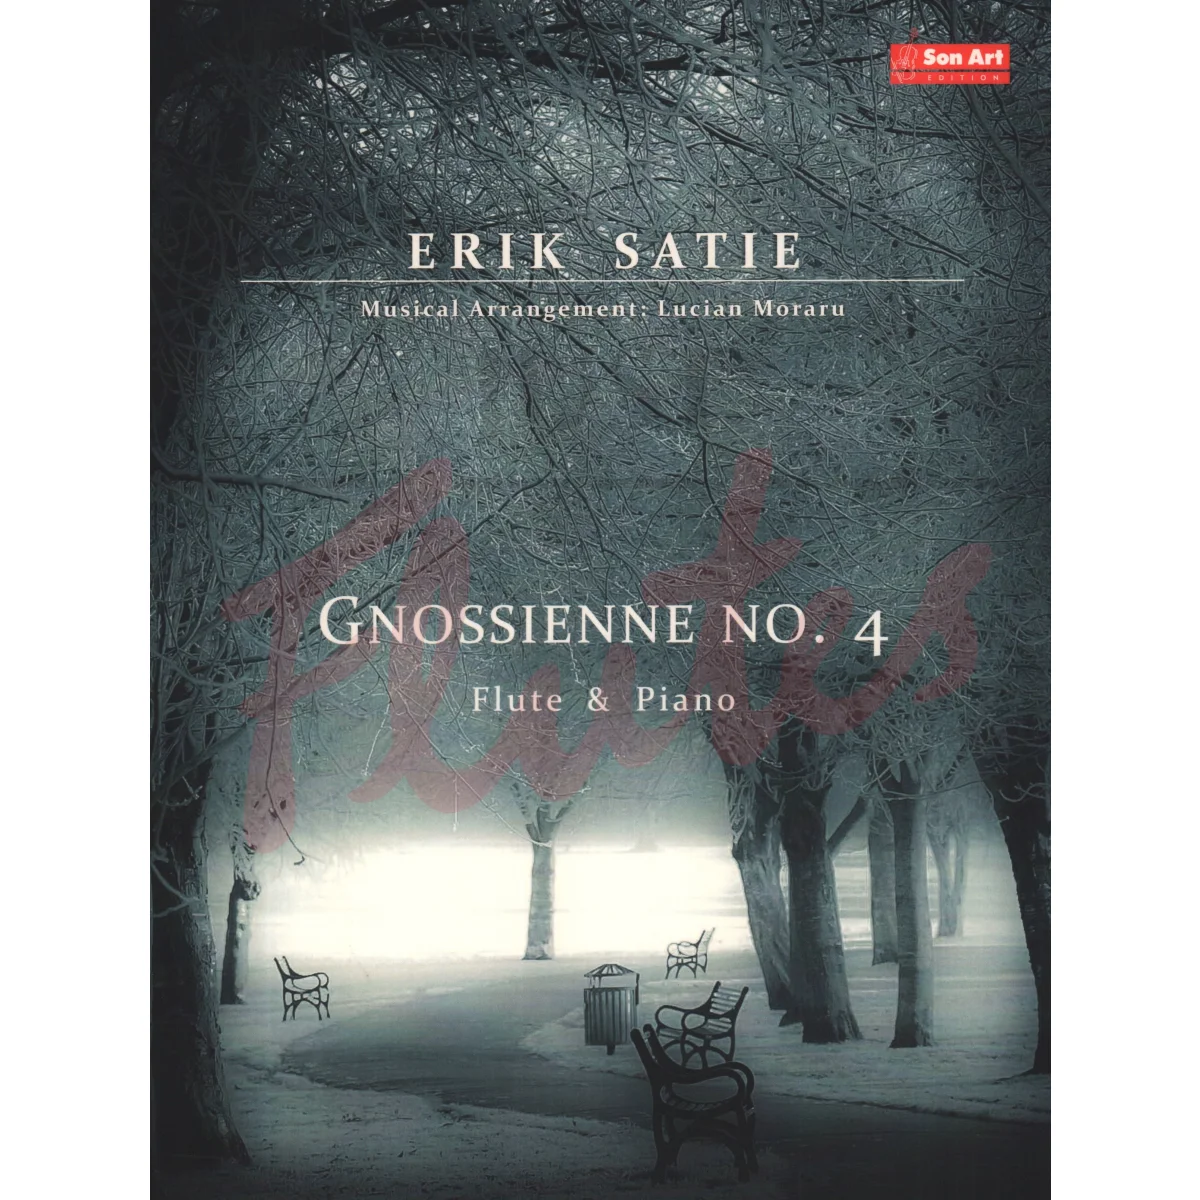 Gnossienne No. 4 for Flute and Piano